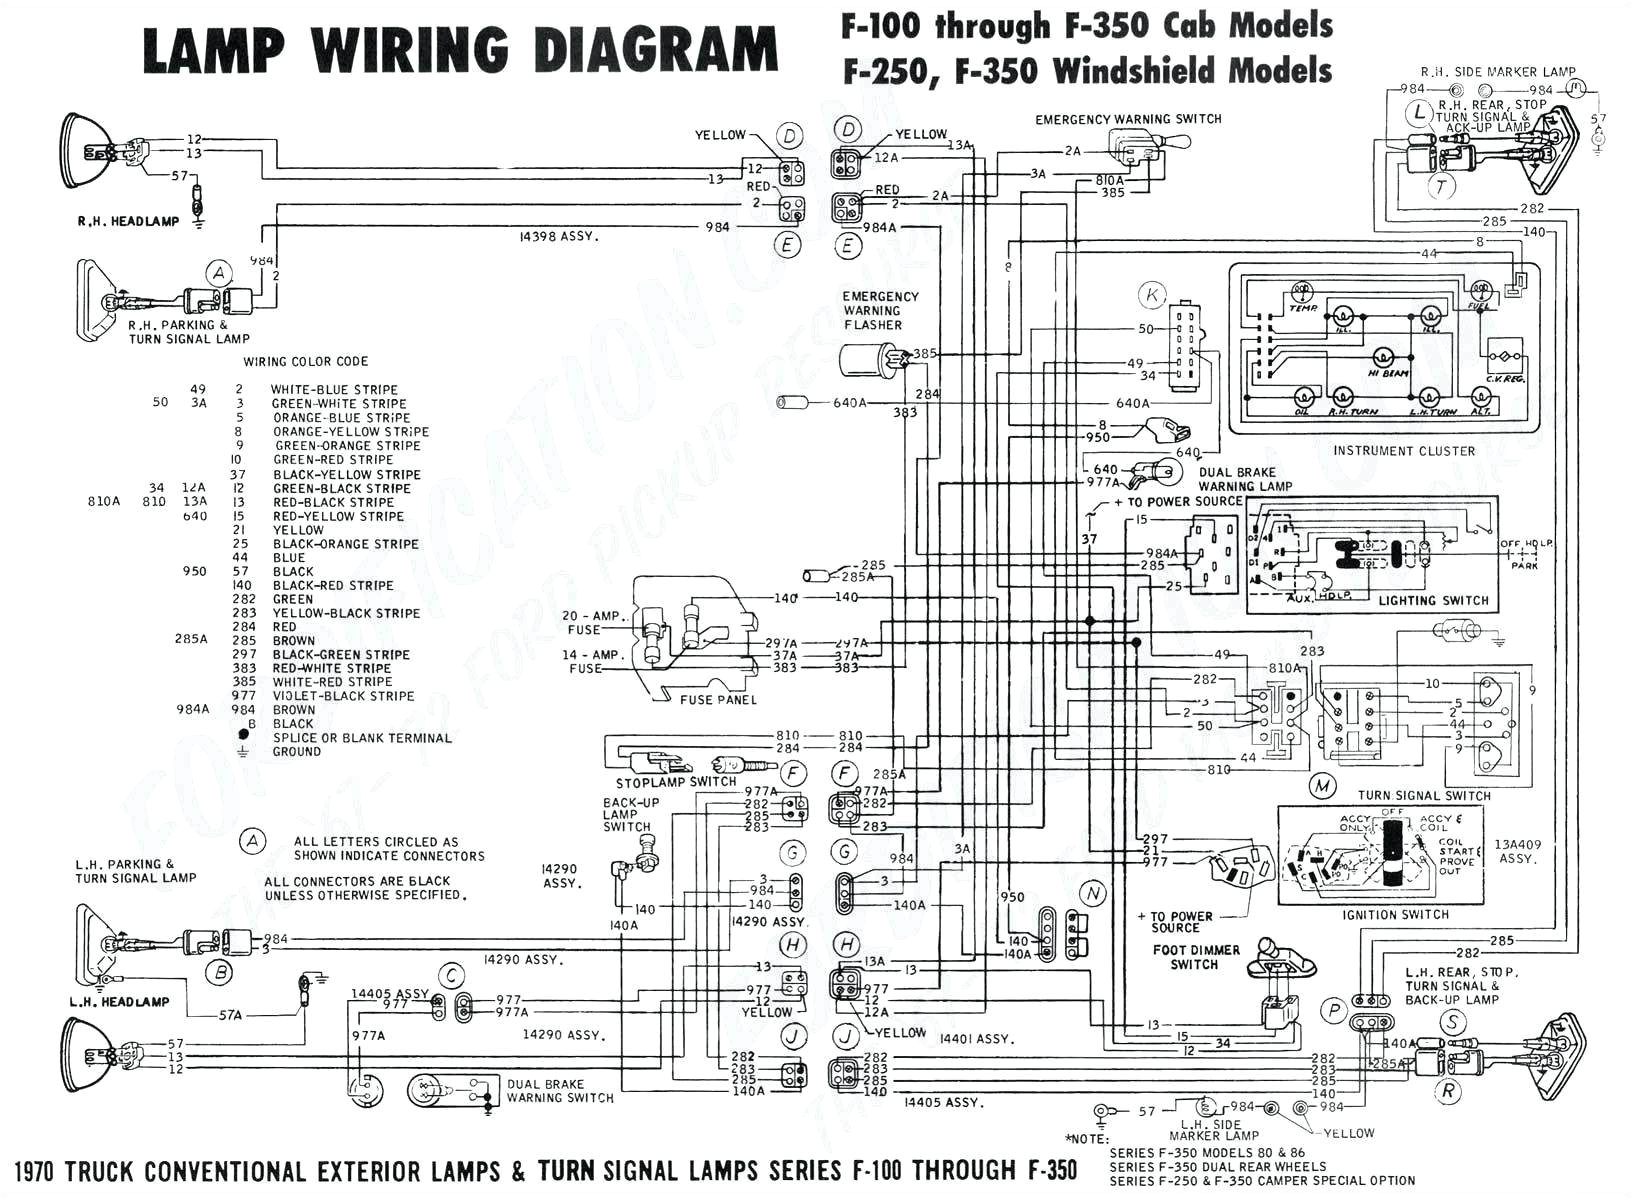 900y73 signal switch wire diagram most searched wiring diagram 900y73 signal switch wire diagram